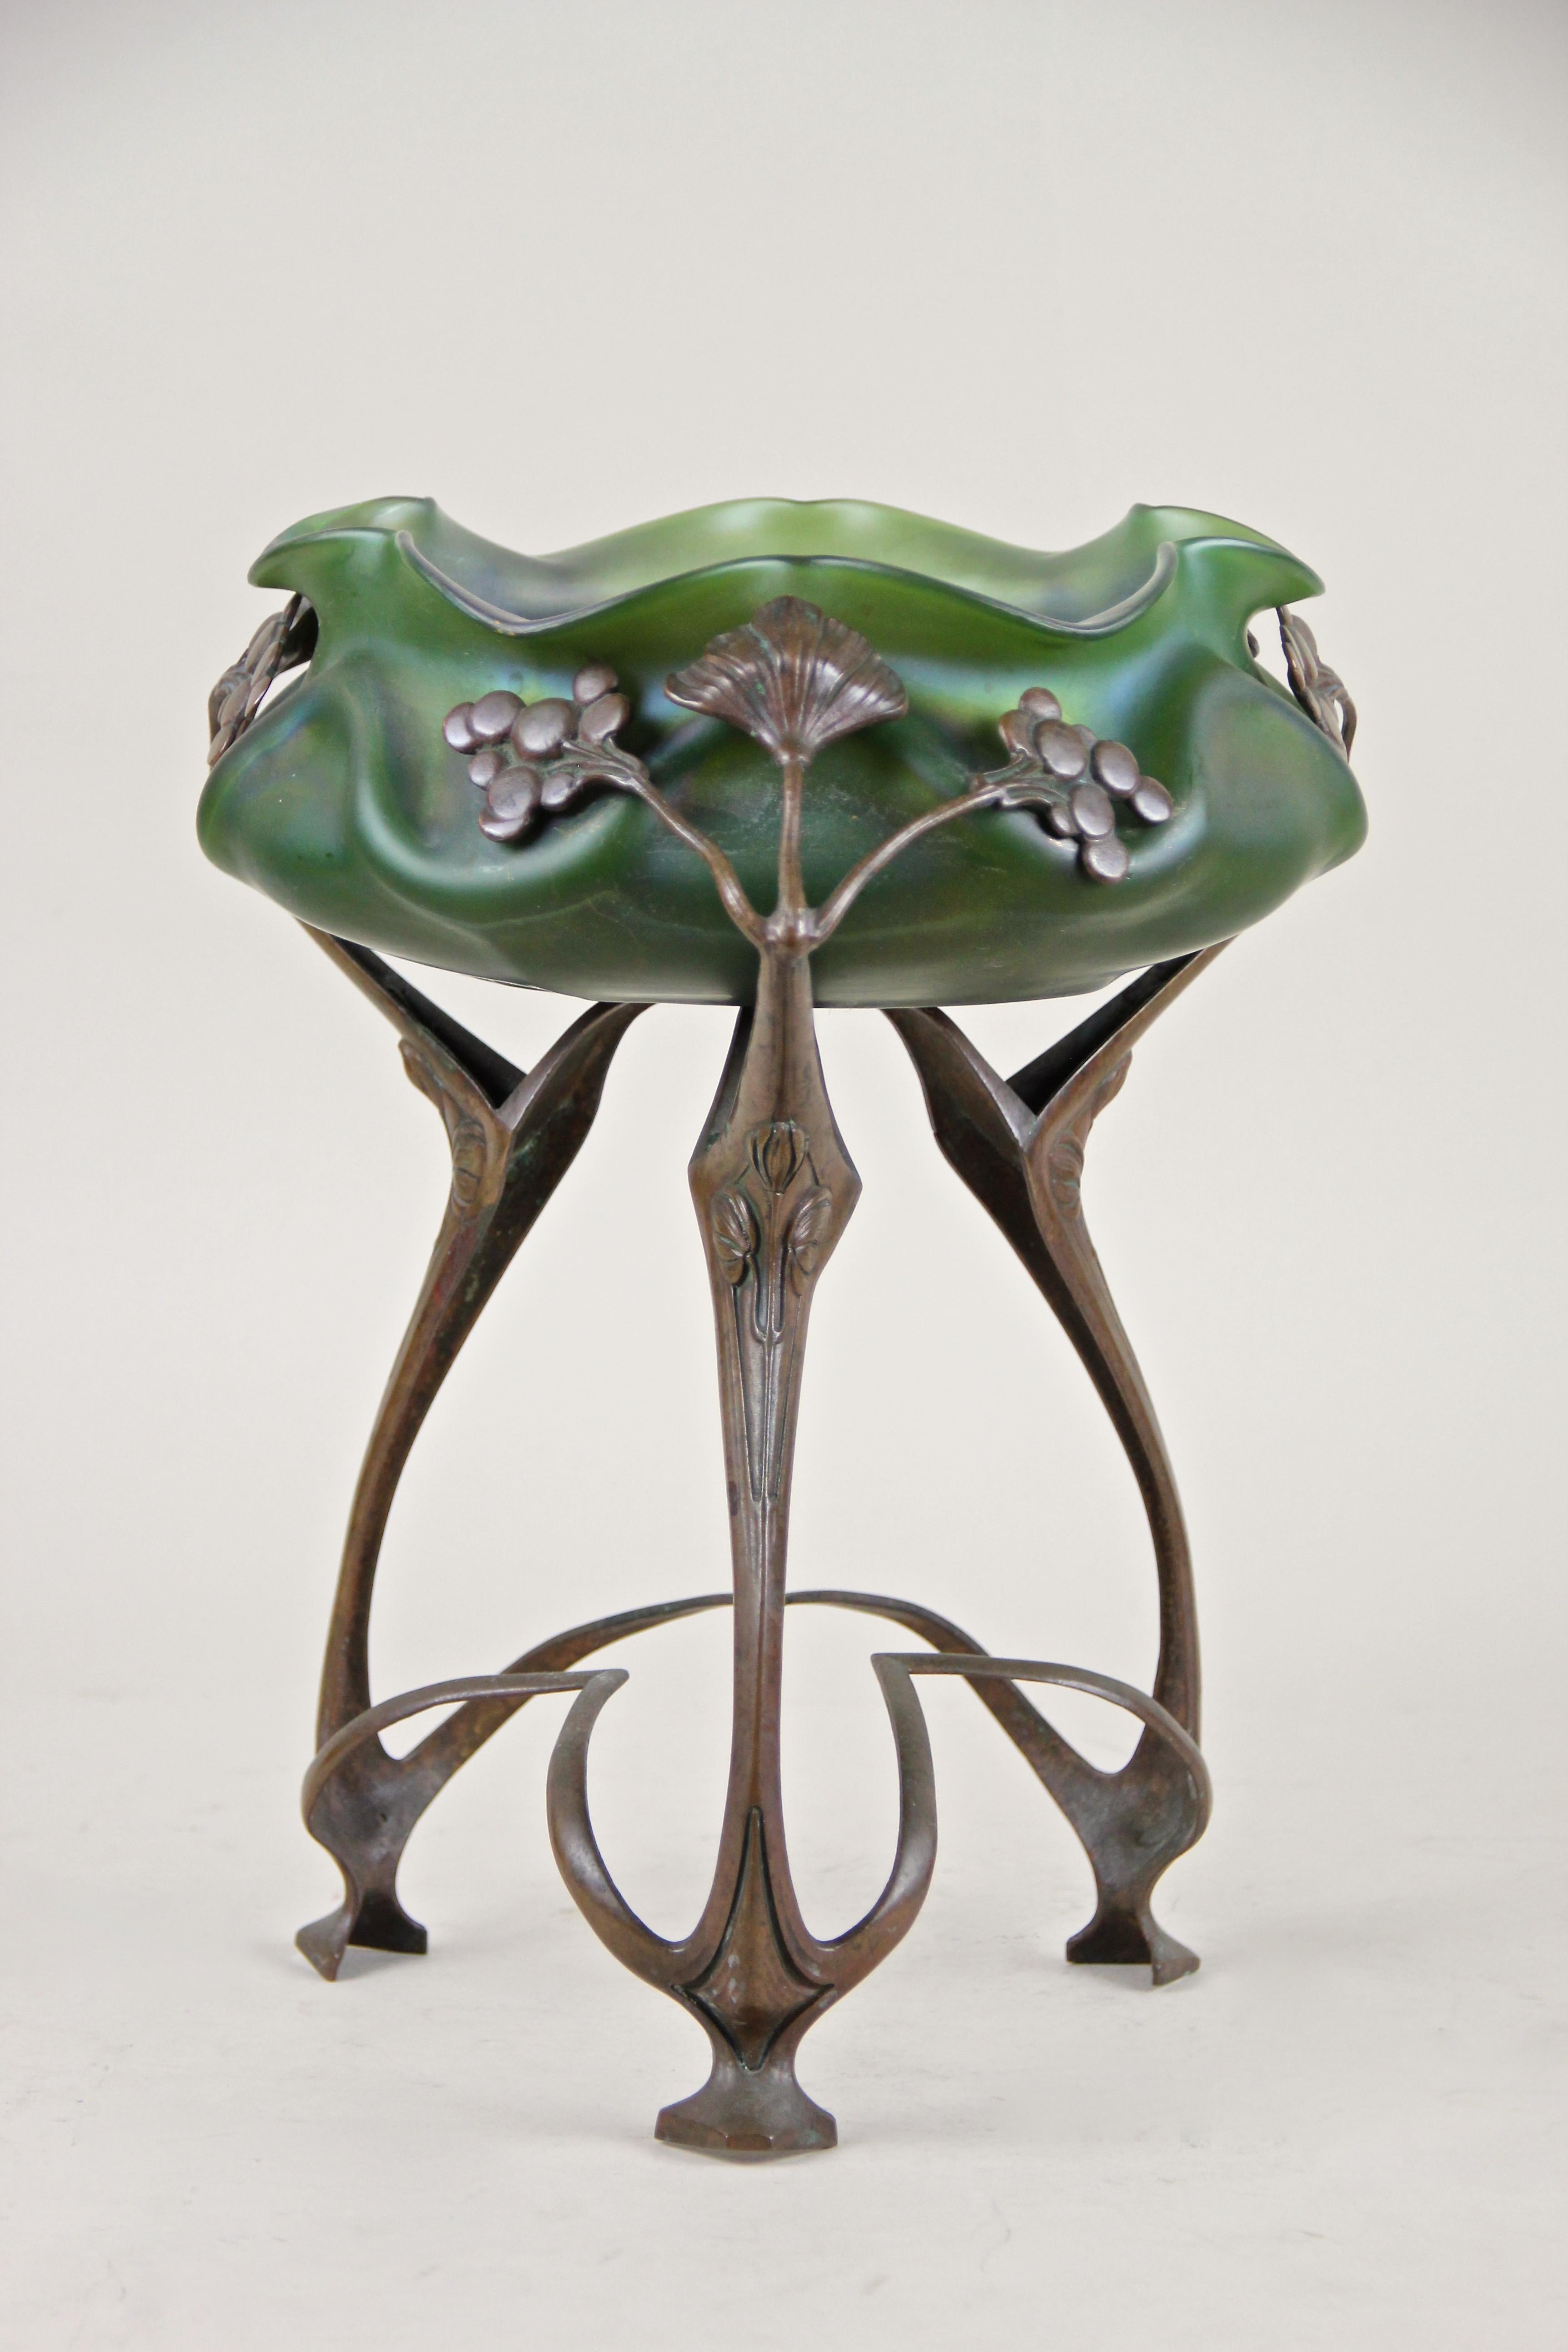 Exceptional bronze centerpiece with iriscident glass bowl by J. Rindskopf from the early Art Nouveau period in Bohemi, circa 1905. This unique masterpiece impresses with an outstanding form laguage, its organic design with classical elements